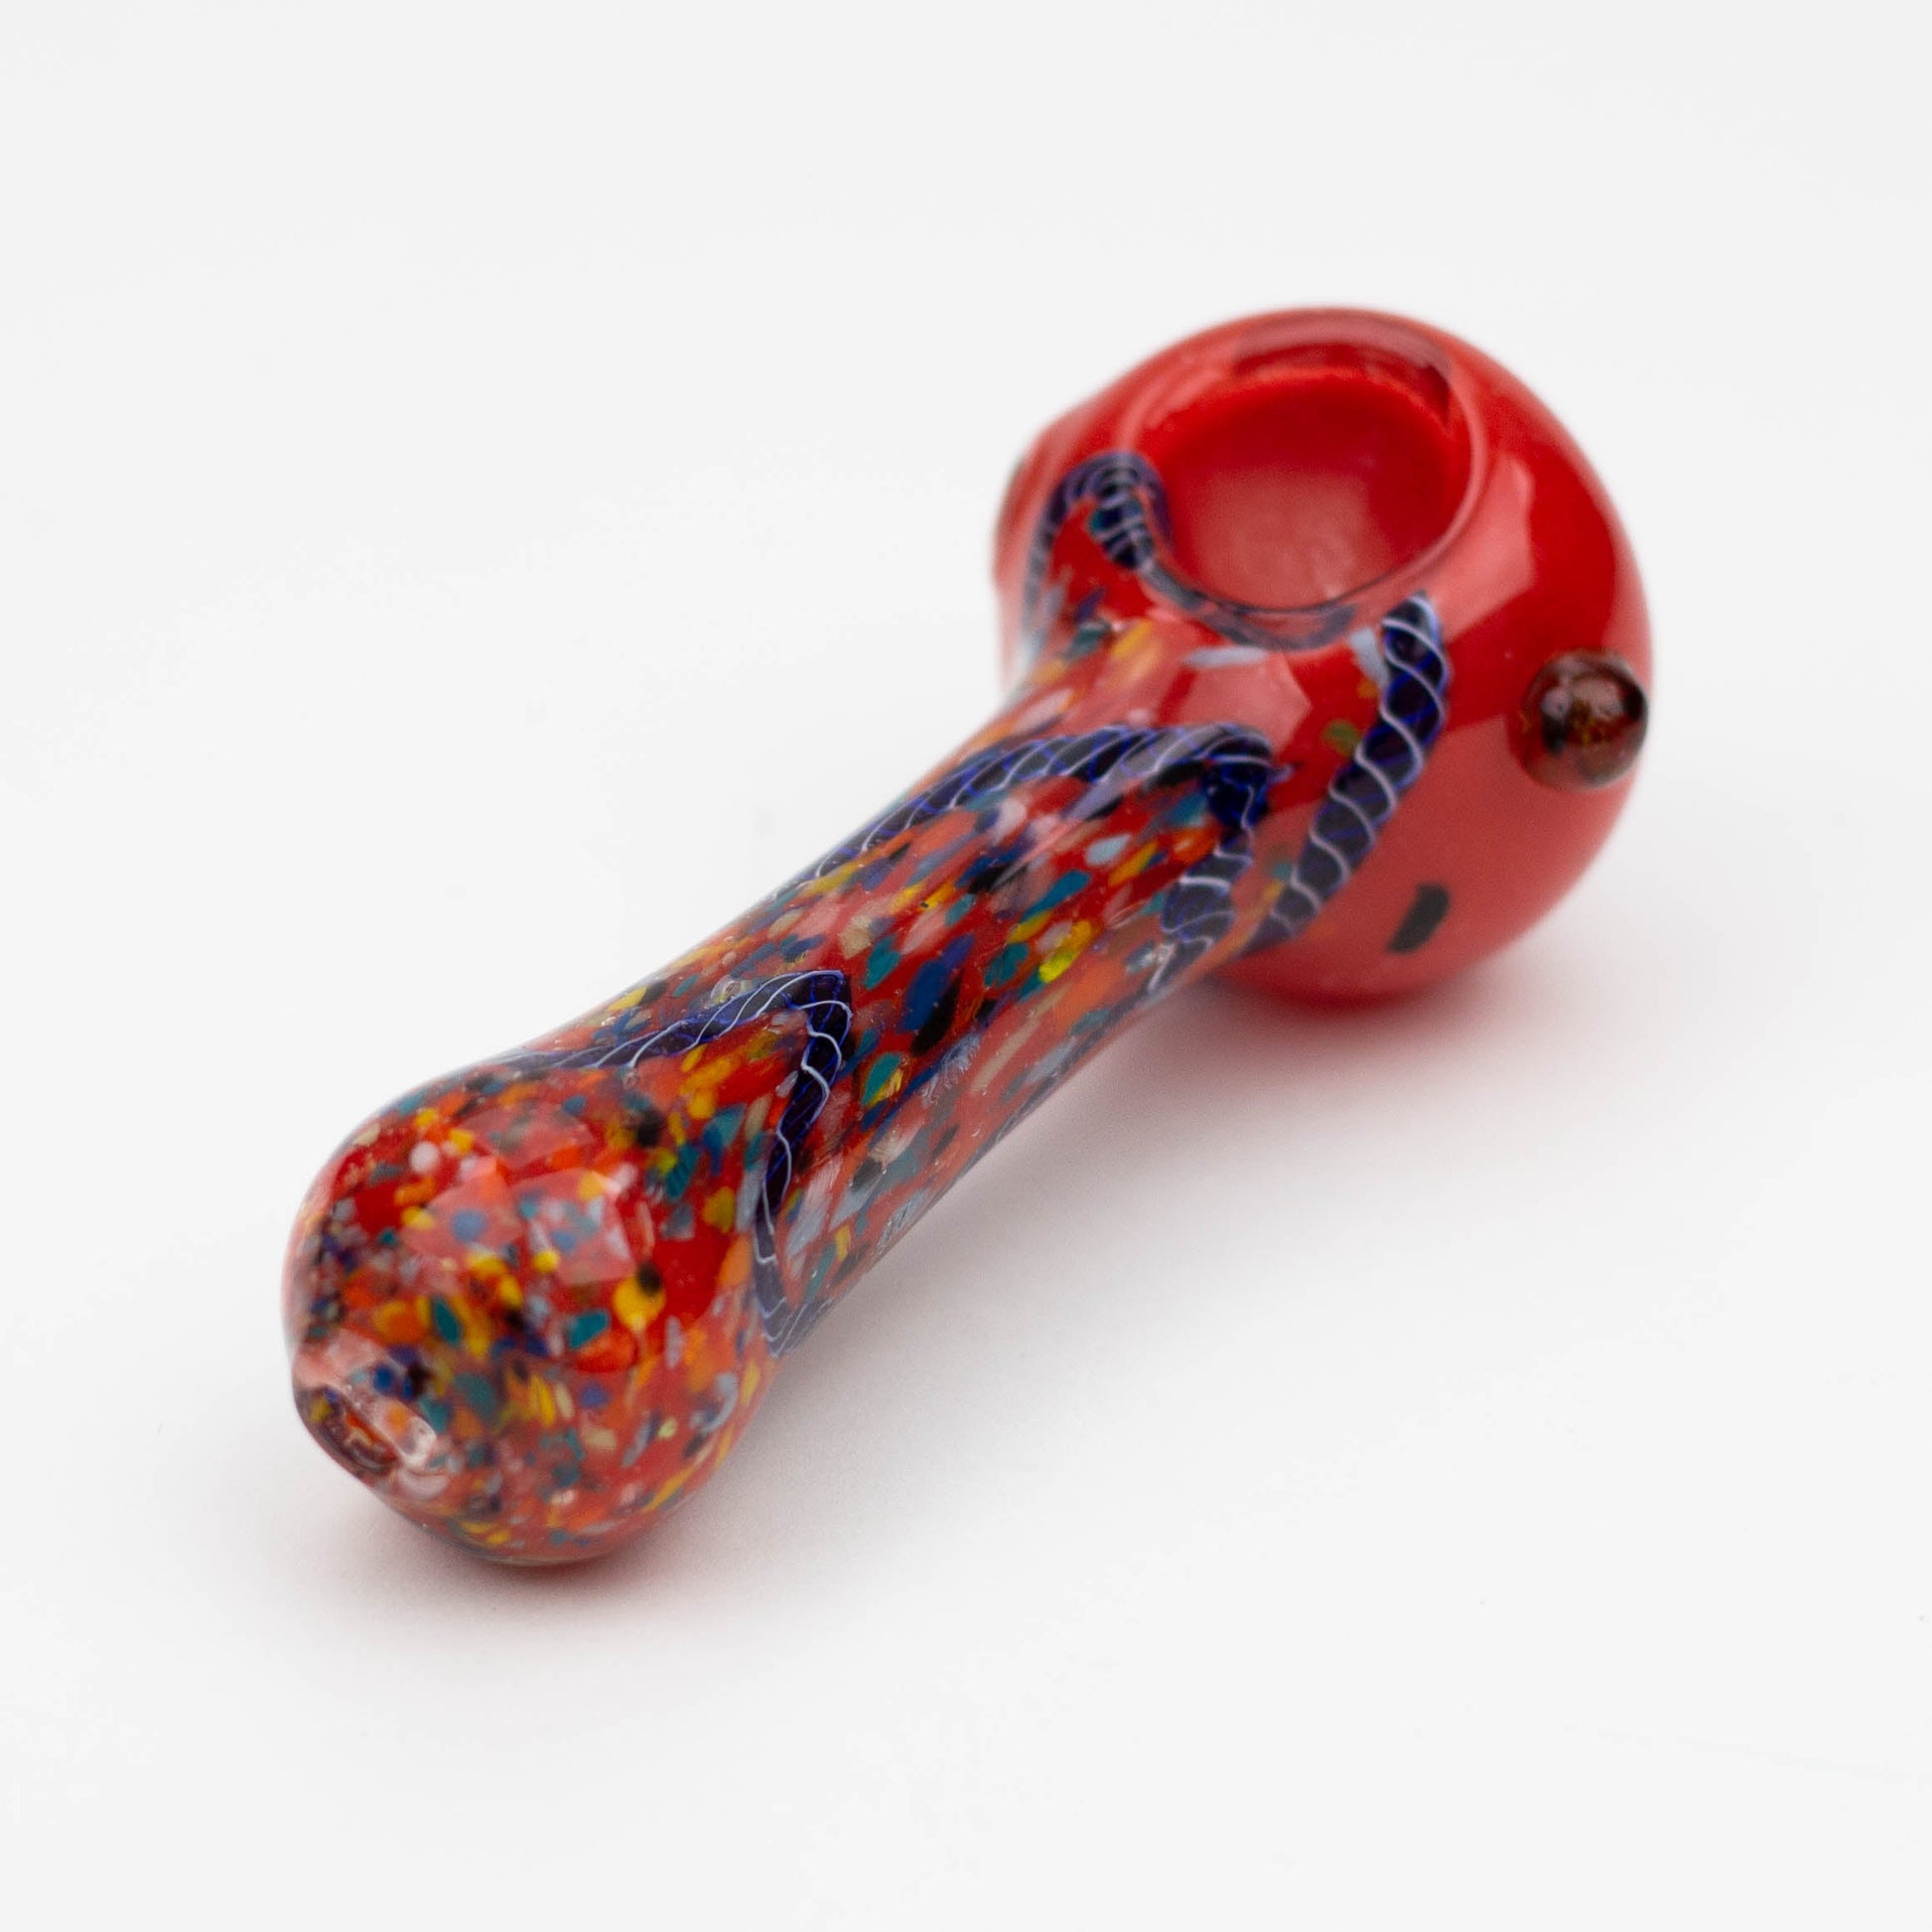 4.5" soft glass hand pipe [AP5221]_1